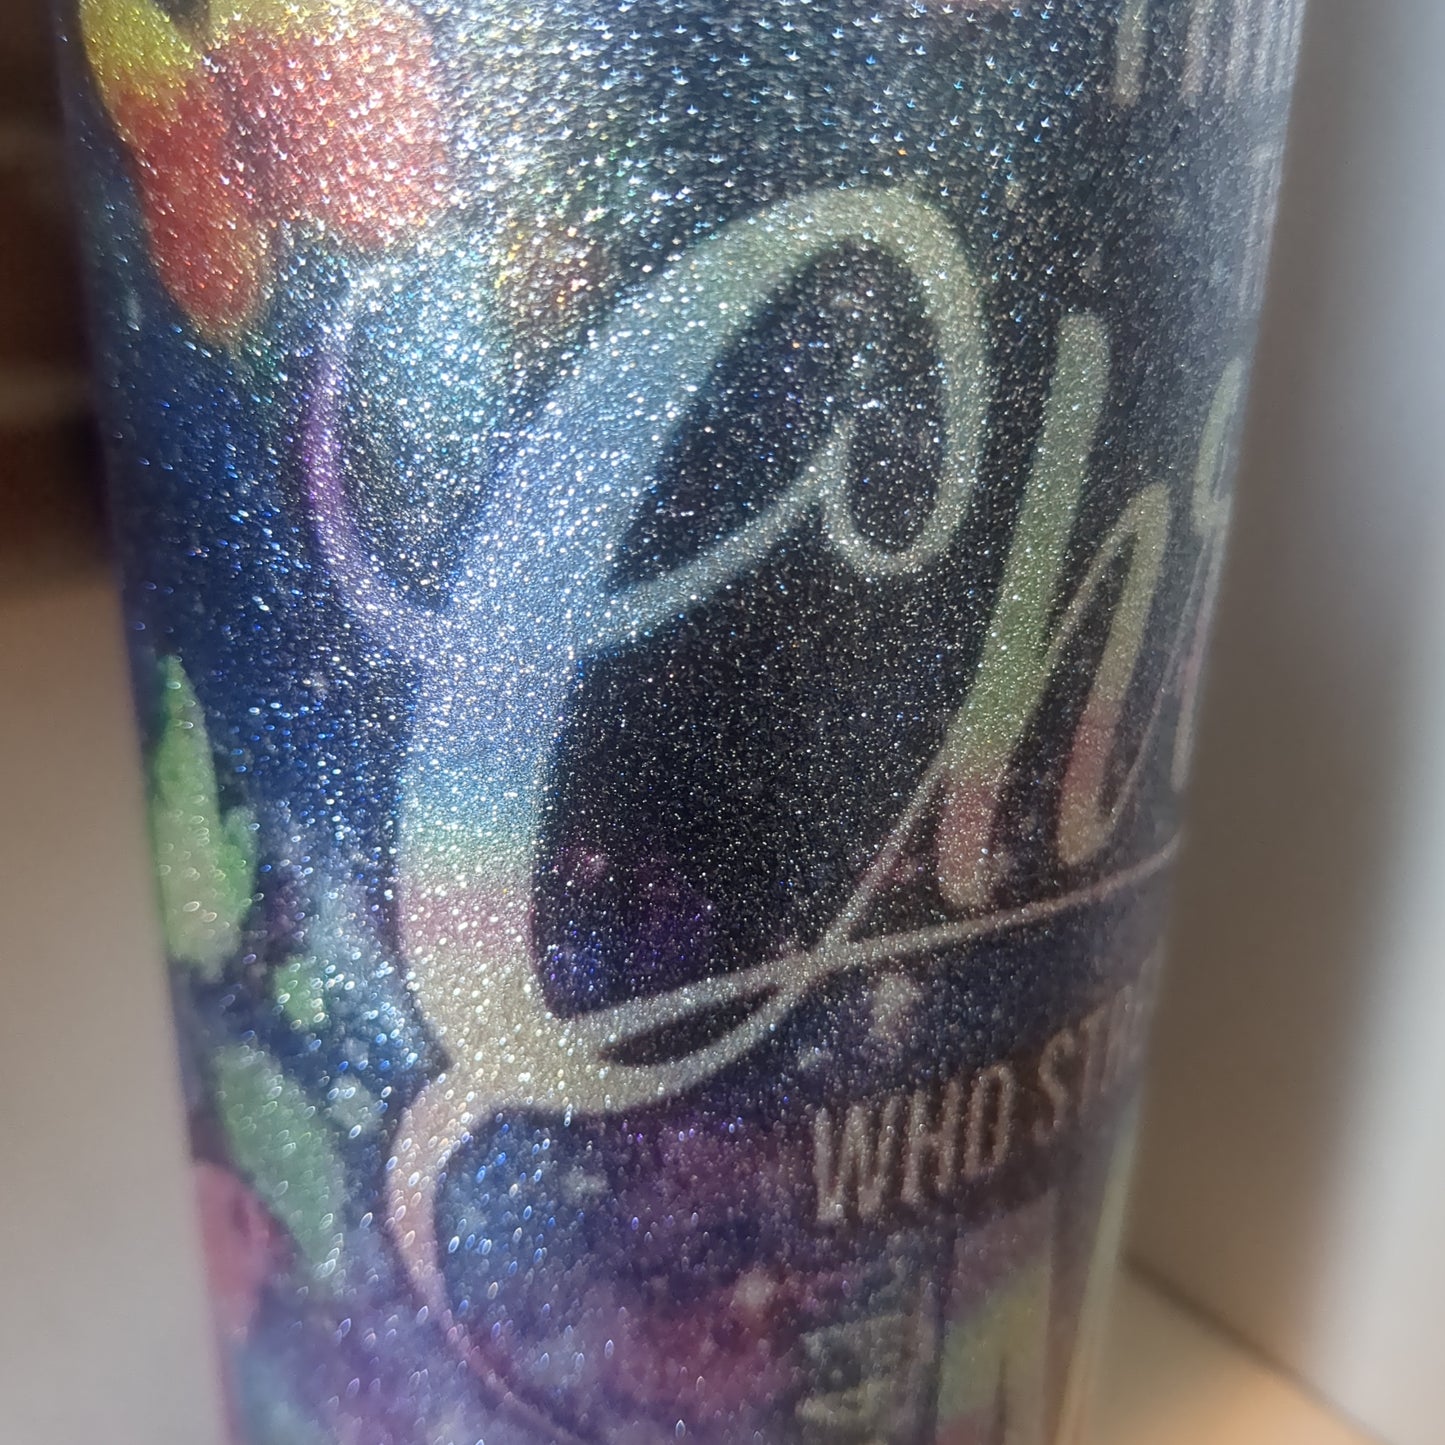 25 Oz Stainless Steel, Insulated, Fatty, glitter Tumbler.  I can do all thing through him